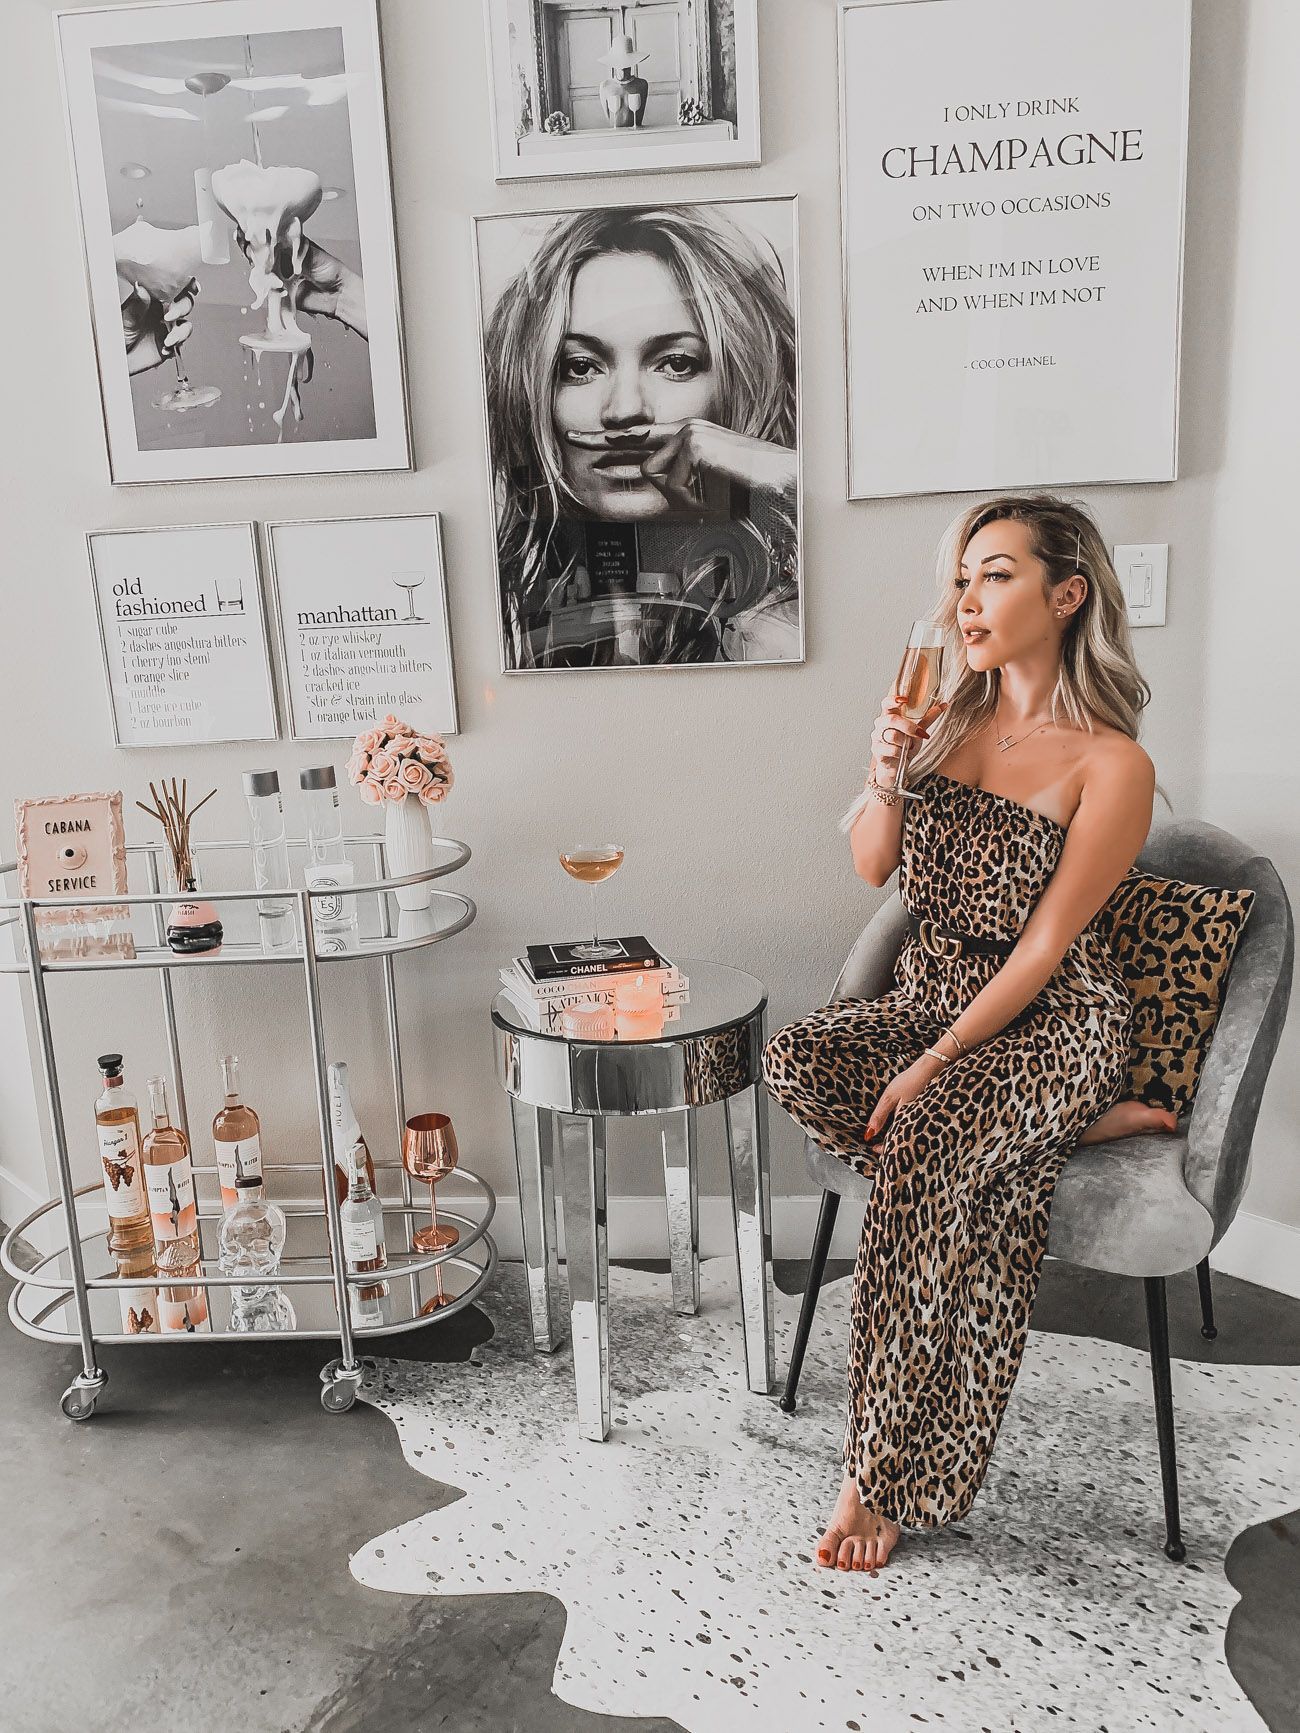 You Don't Just Need A Bar Cart... You Need A Bar Area - BLONDIE IN THE CITY - You Don't Just Need A Bar Cart... You Need A Bar Area - BLONDIE IN THE CITY -   13 beauty Bar in bedroom ideas